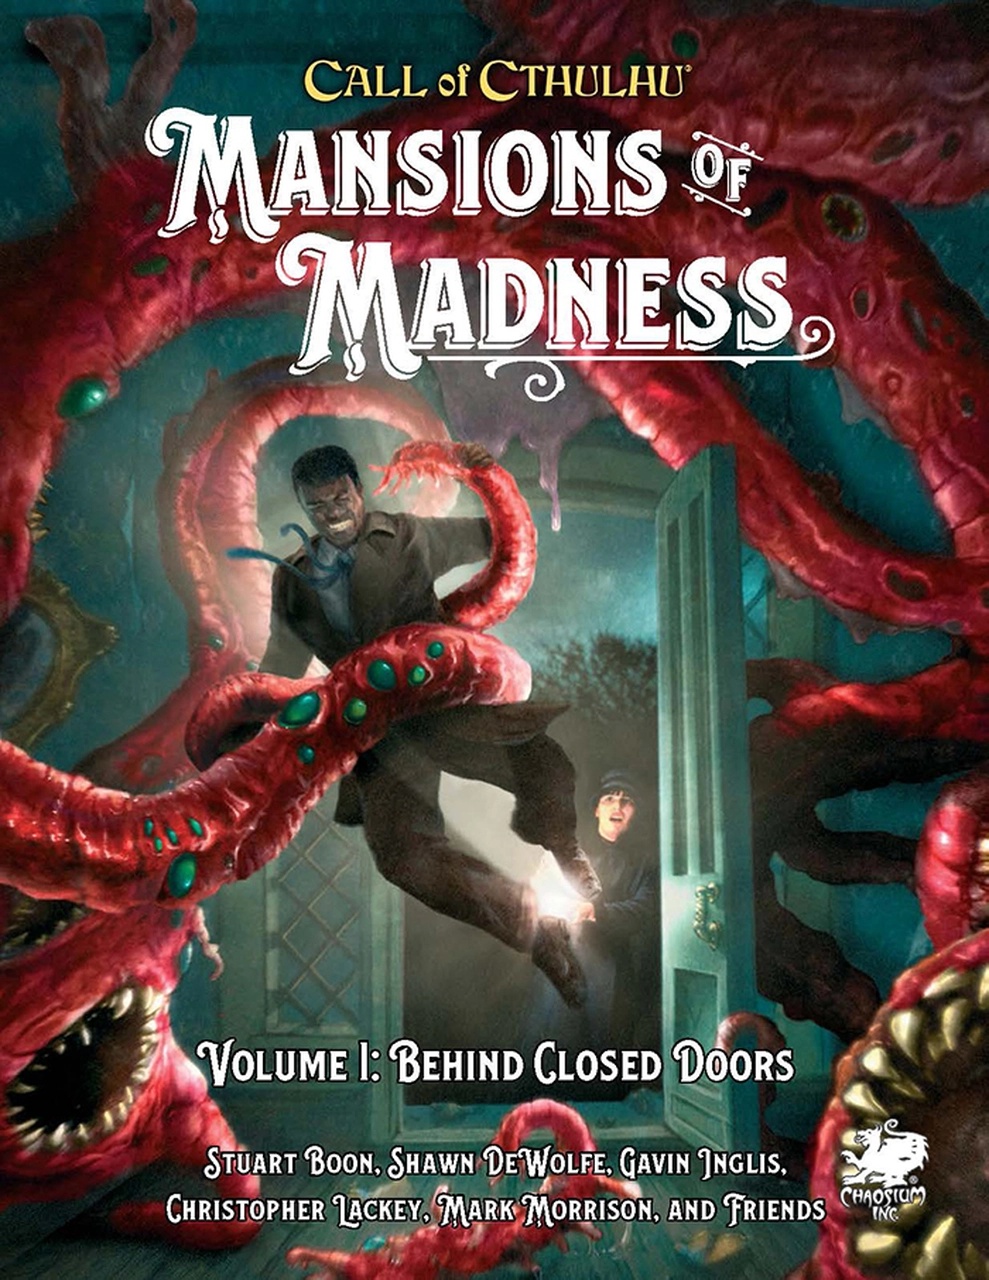 Call of Cthulhu Mansions of Madness: Vol 1 - Behind Closed Doors